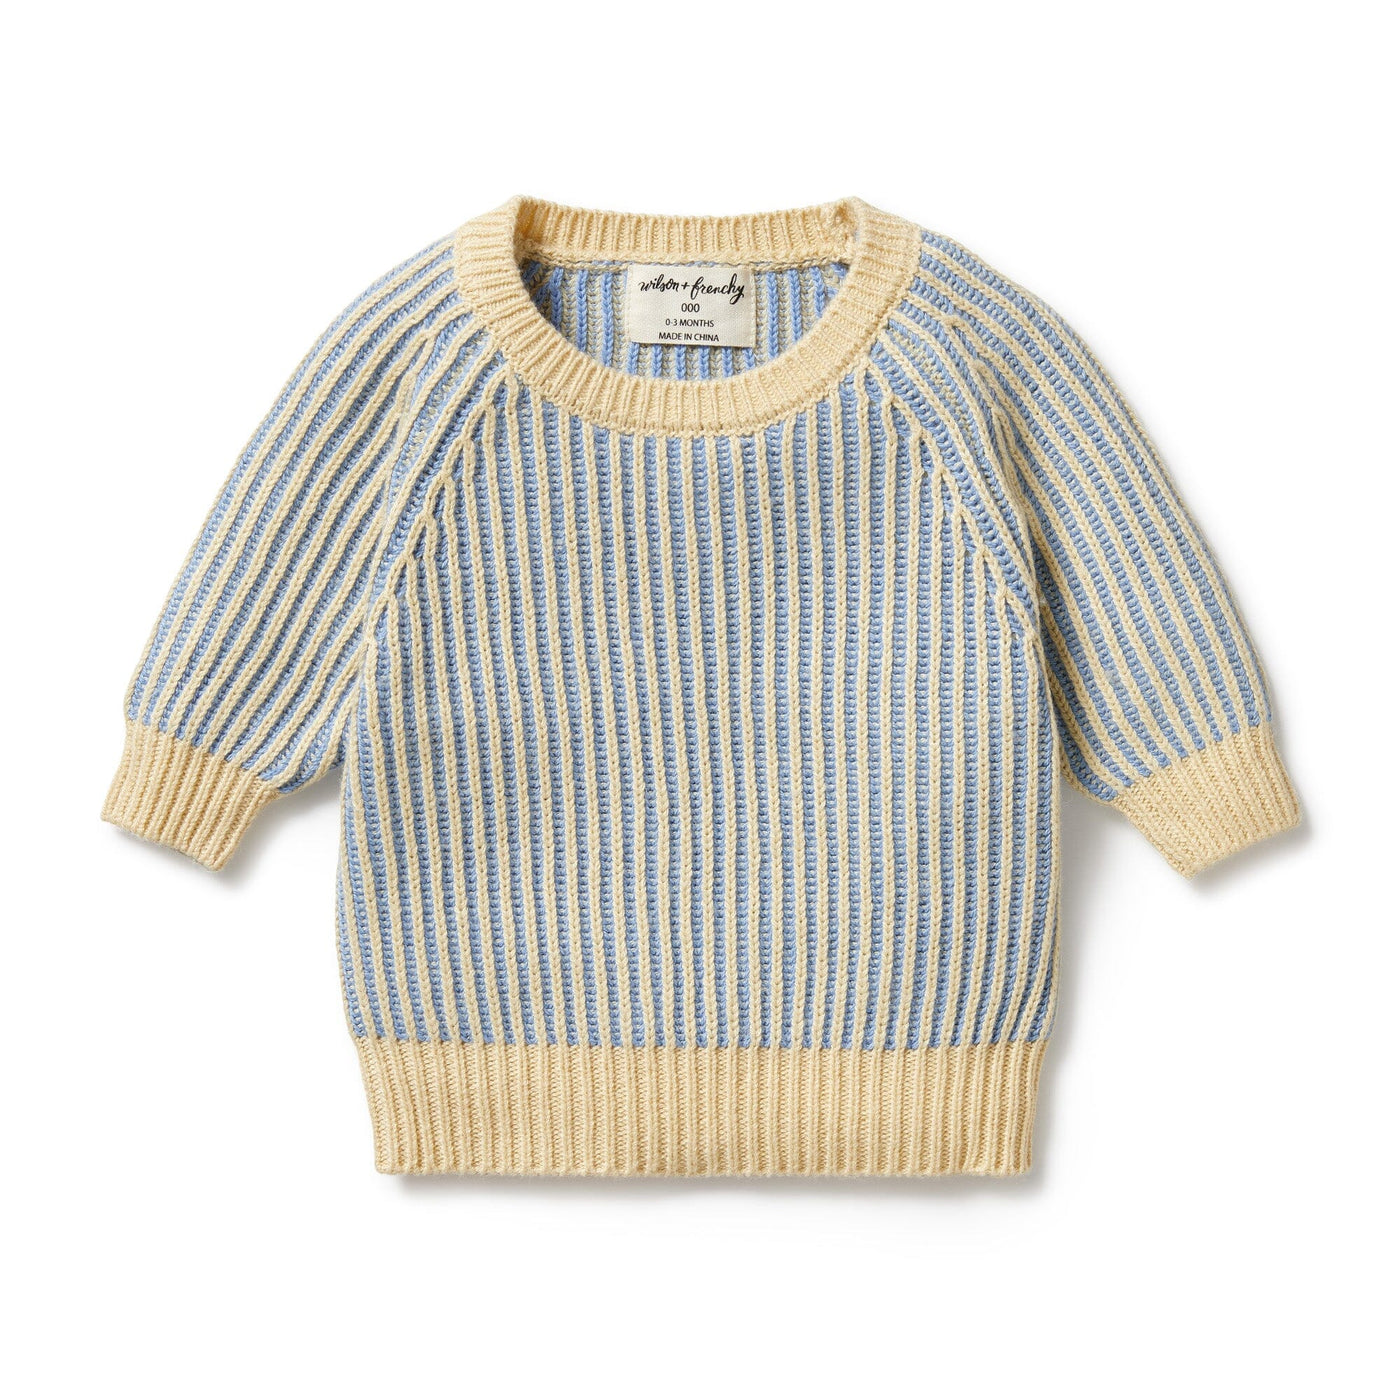 Wilson & Frenchy Knitted Ribbed Jumper - Dew Knitted Jumper Wilson & Frenchy 